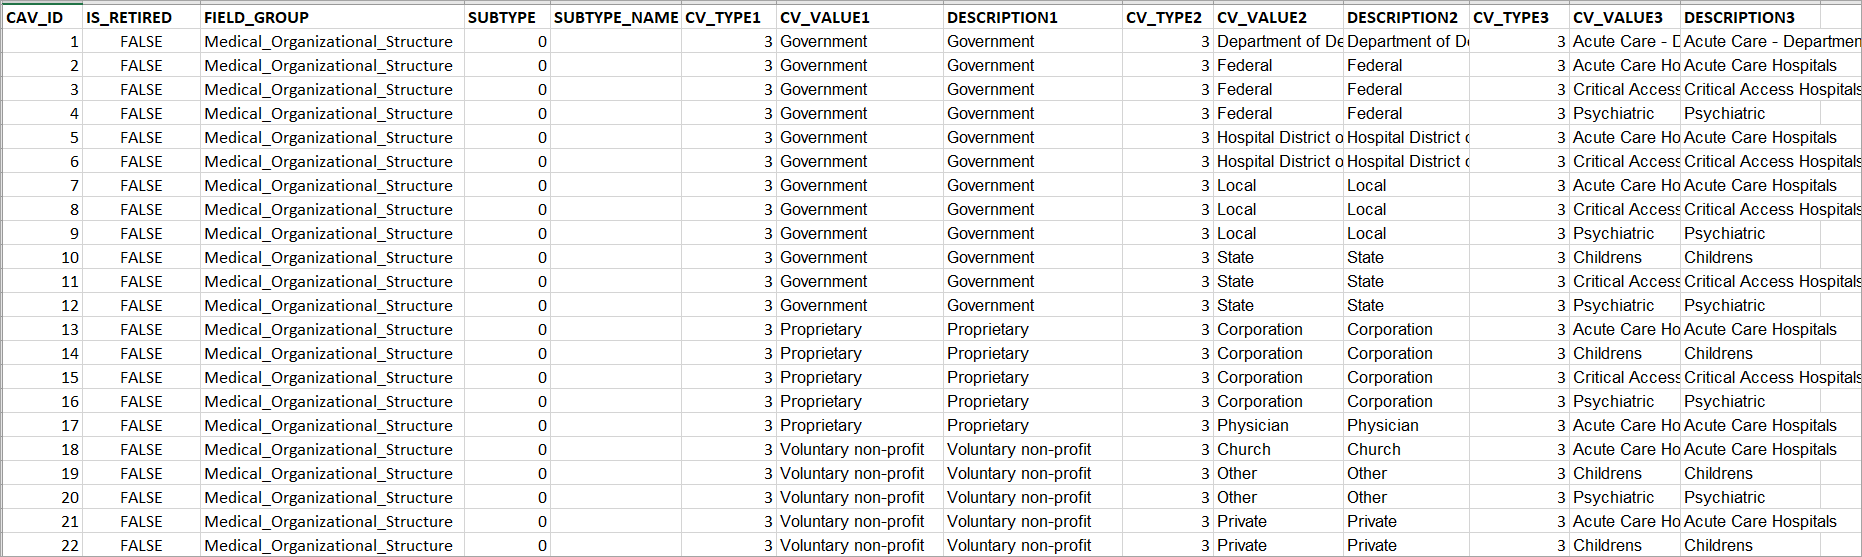 The Contingent Values table